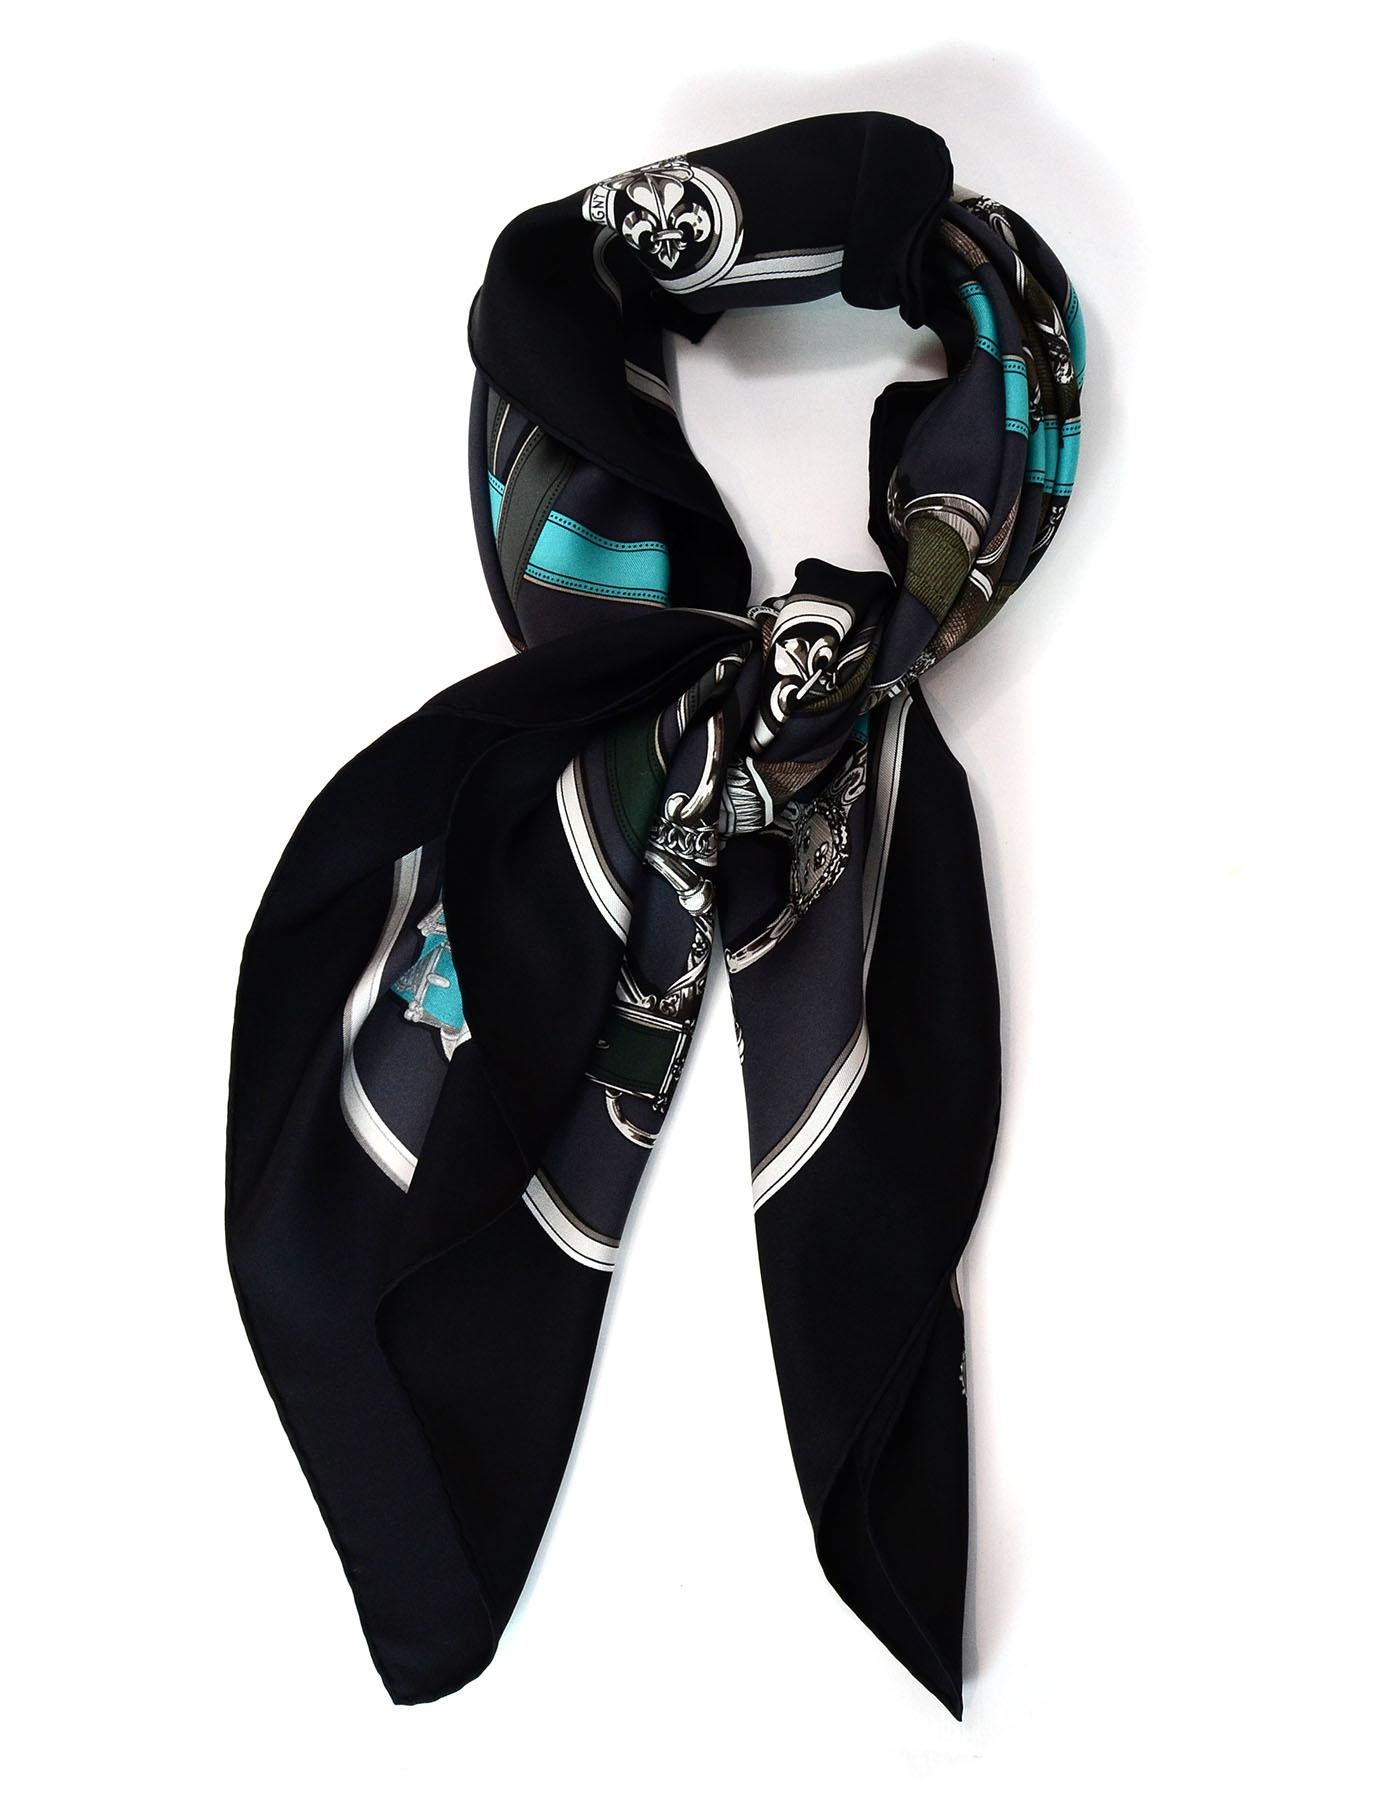 Hermes Dark Grey, Black & Blue Cavalcadour Silk 90cm Scarf

Made In: France
Color: Black, dark grey, blue
Composition: 100% Silk
Overall Condition: Excellent pre-owned condition
Included: Hermes box

Measurements:
Length: 35